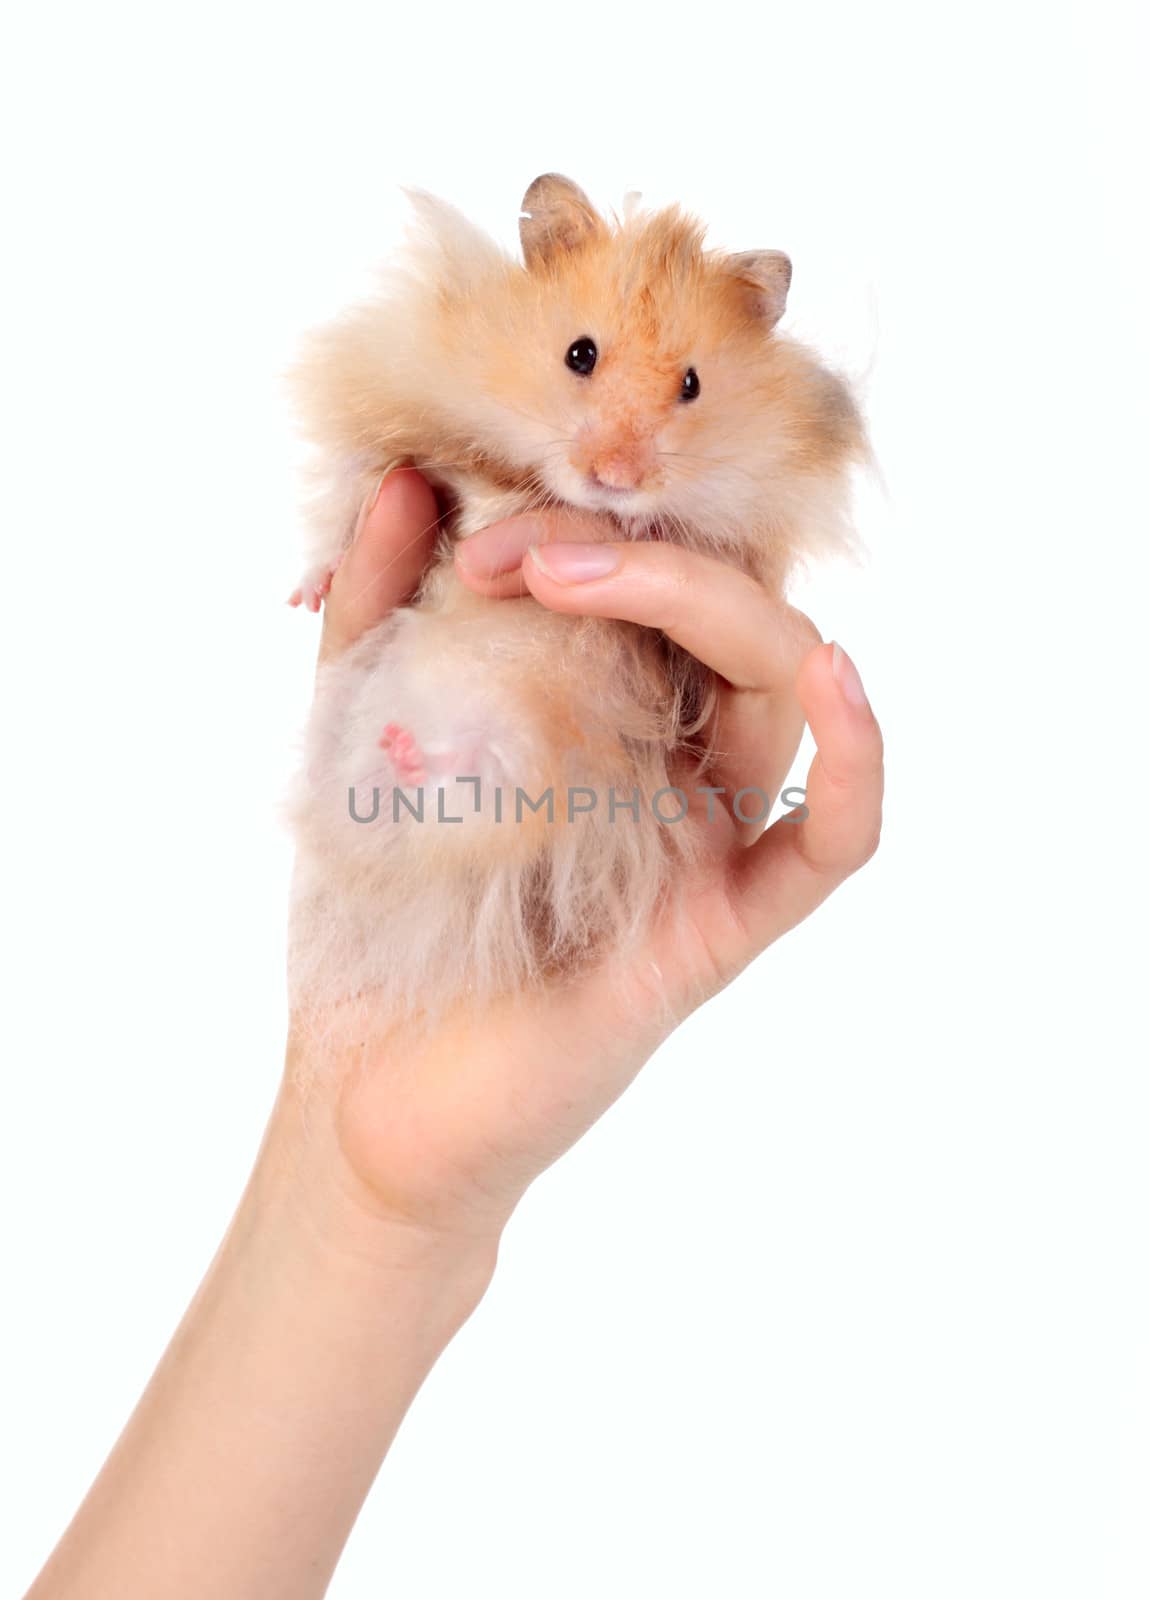 Funny hamster in the hand isolated on the white background